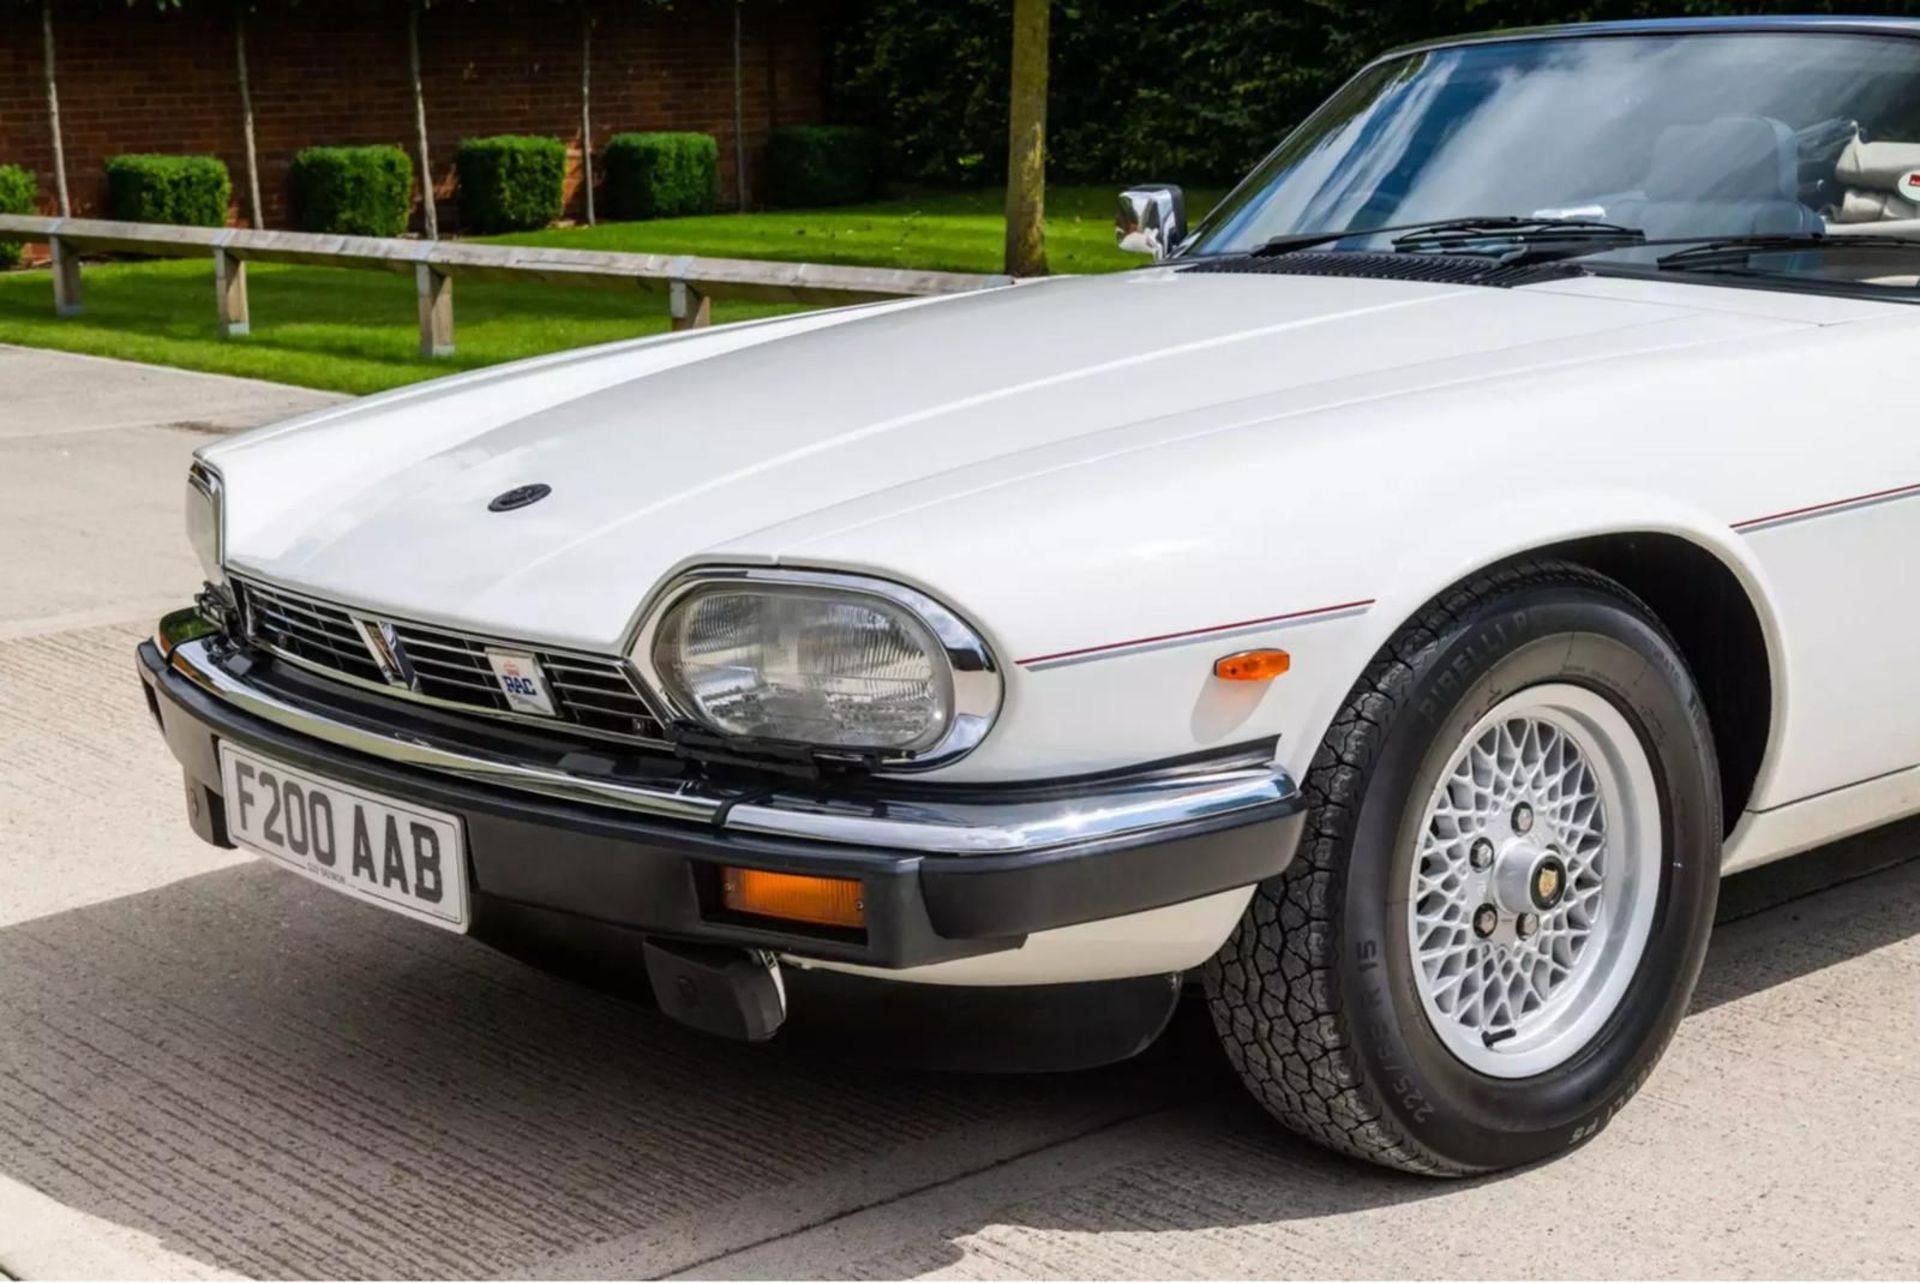 Jaguar XJ-S Convertible 1989. Just 19800 miles from new! - Image 3 of 10